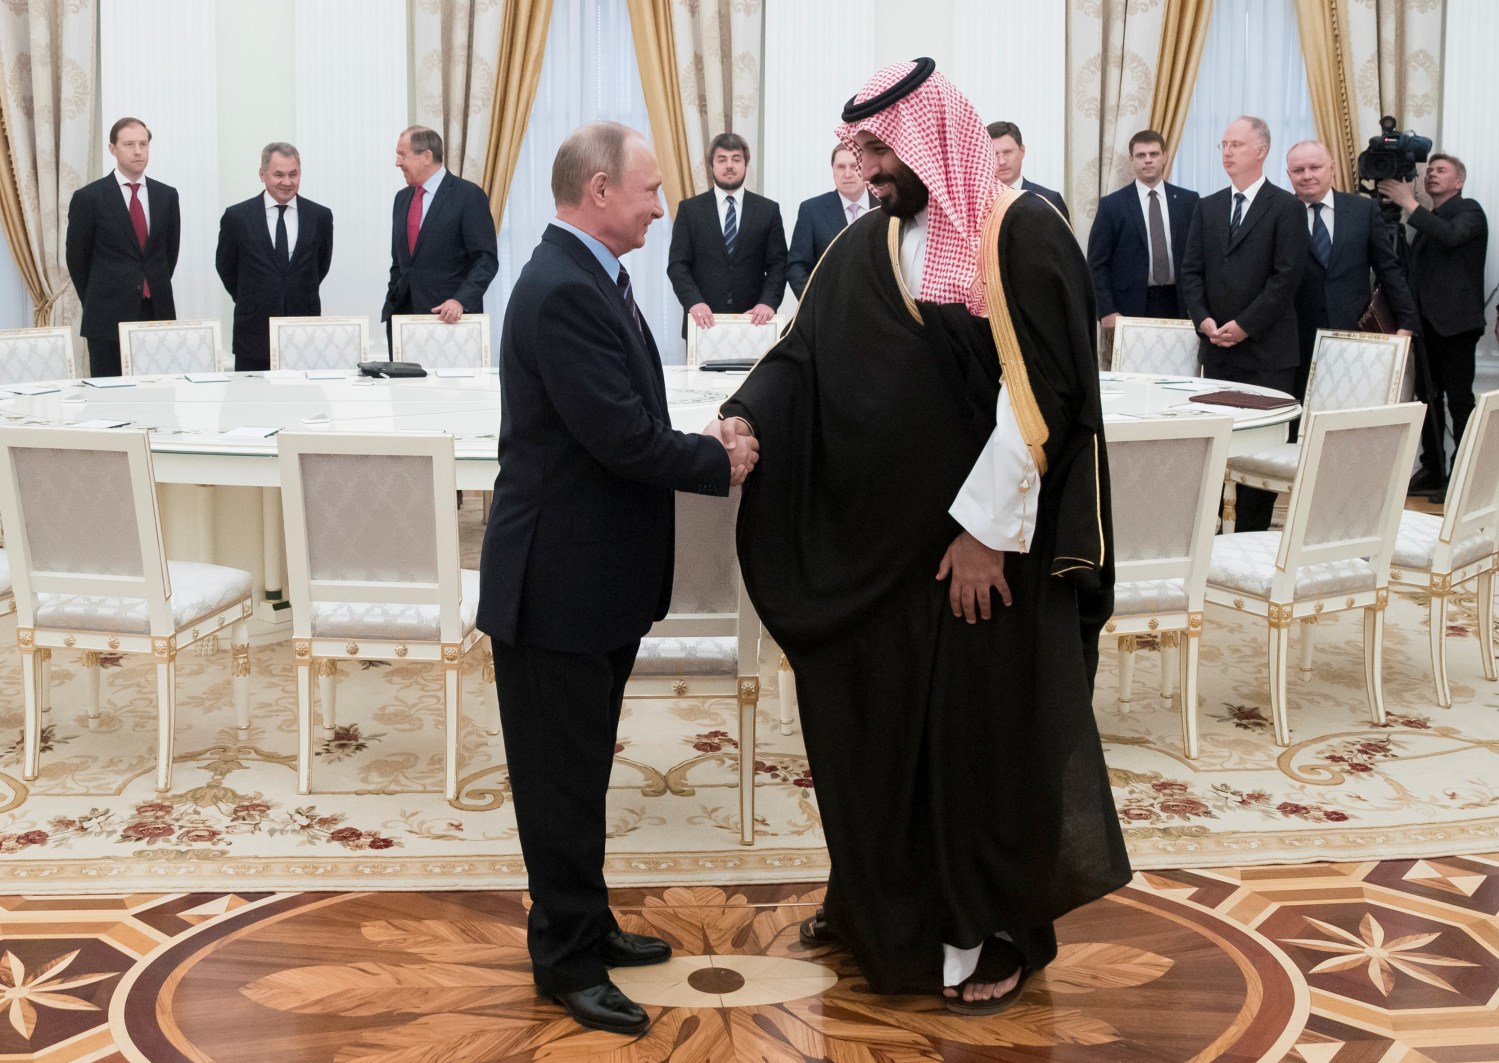 Russian President Vladimir Putin shakes hands with Saudi Deputy Crown Prince and Defence Minister Mohammed bin Salman during a meeting at the Kremlin in Moscow, Russia, May 30, 2017. REUTERS/Pavel Golovkin/Pool - RC19885B9FF0